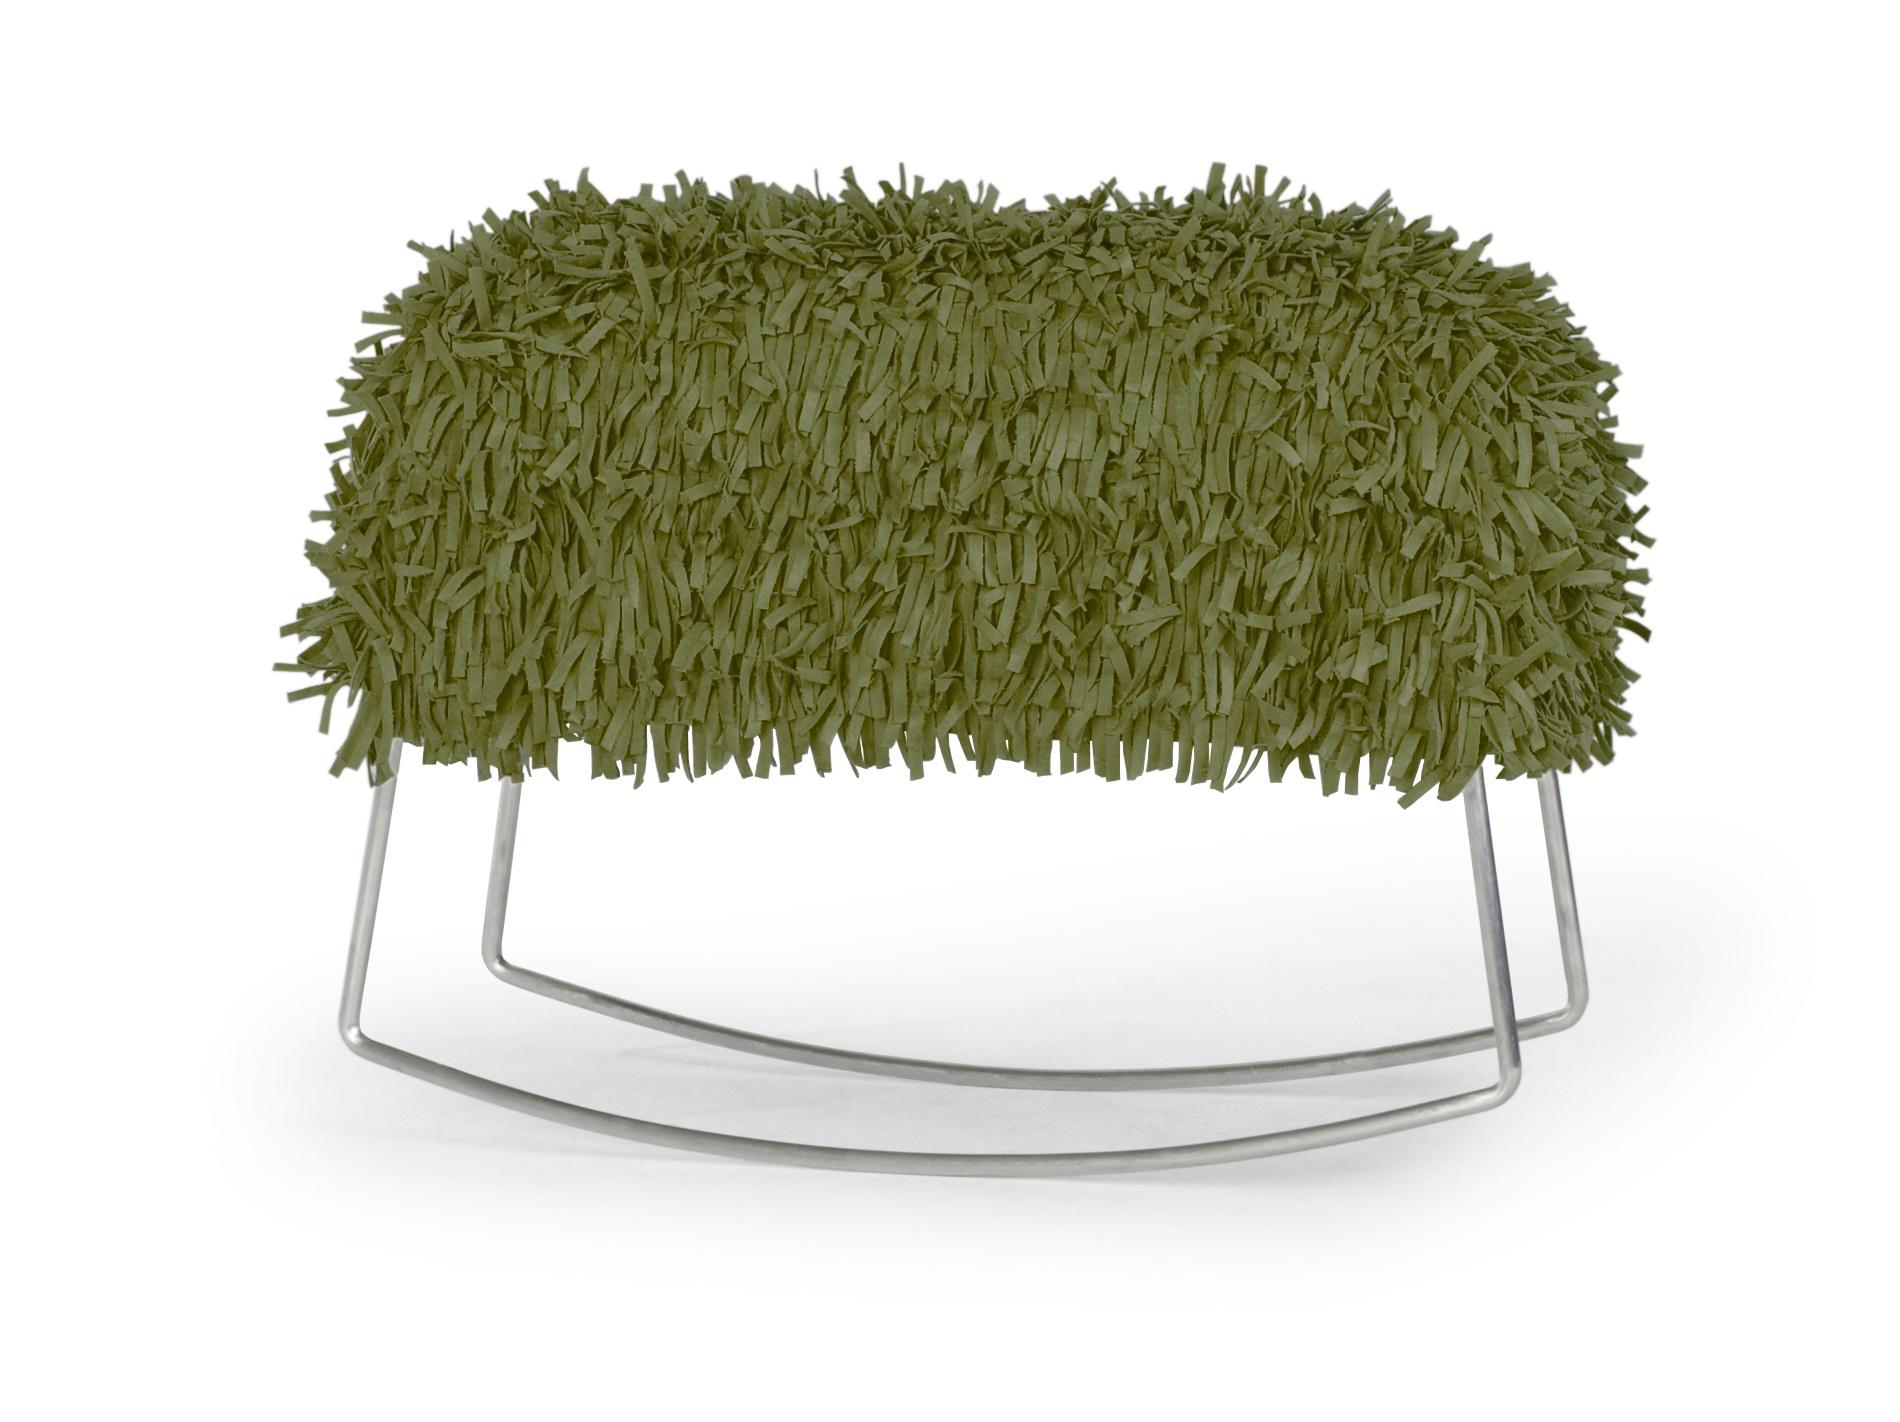 Moss green harry rocking chair by Kenneth Cobonpue.
Materials: microfiber, urethane foam, stainless steel, plywood. 
Also available in other colors.
Dimensions: 28 cm x 67 cm x H 55 cm.

Harry brings the fun of the outdoors inside with its